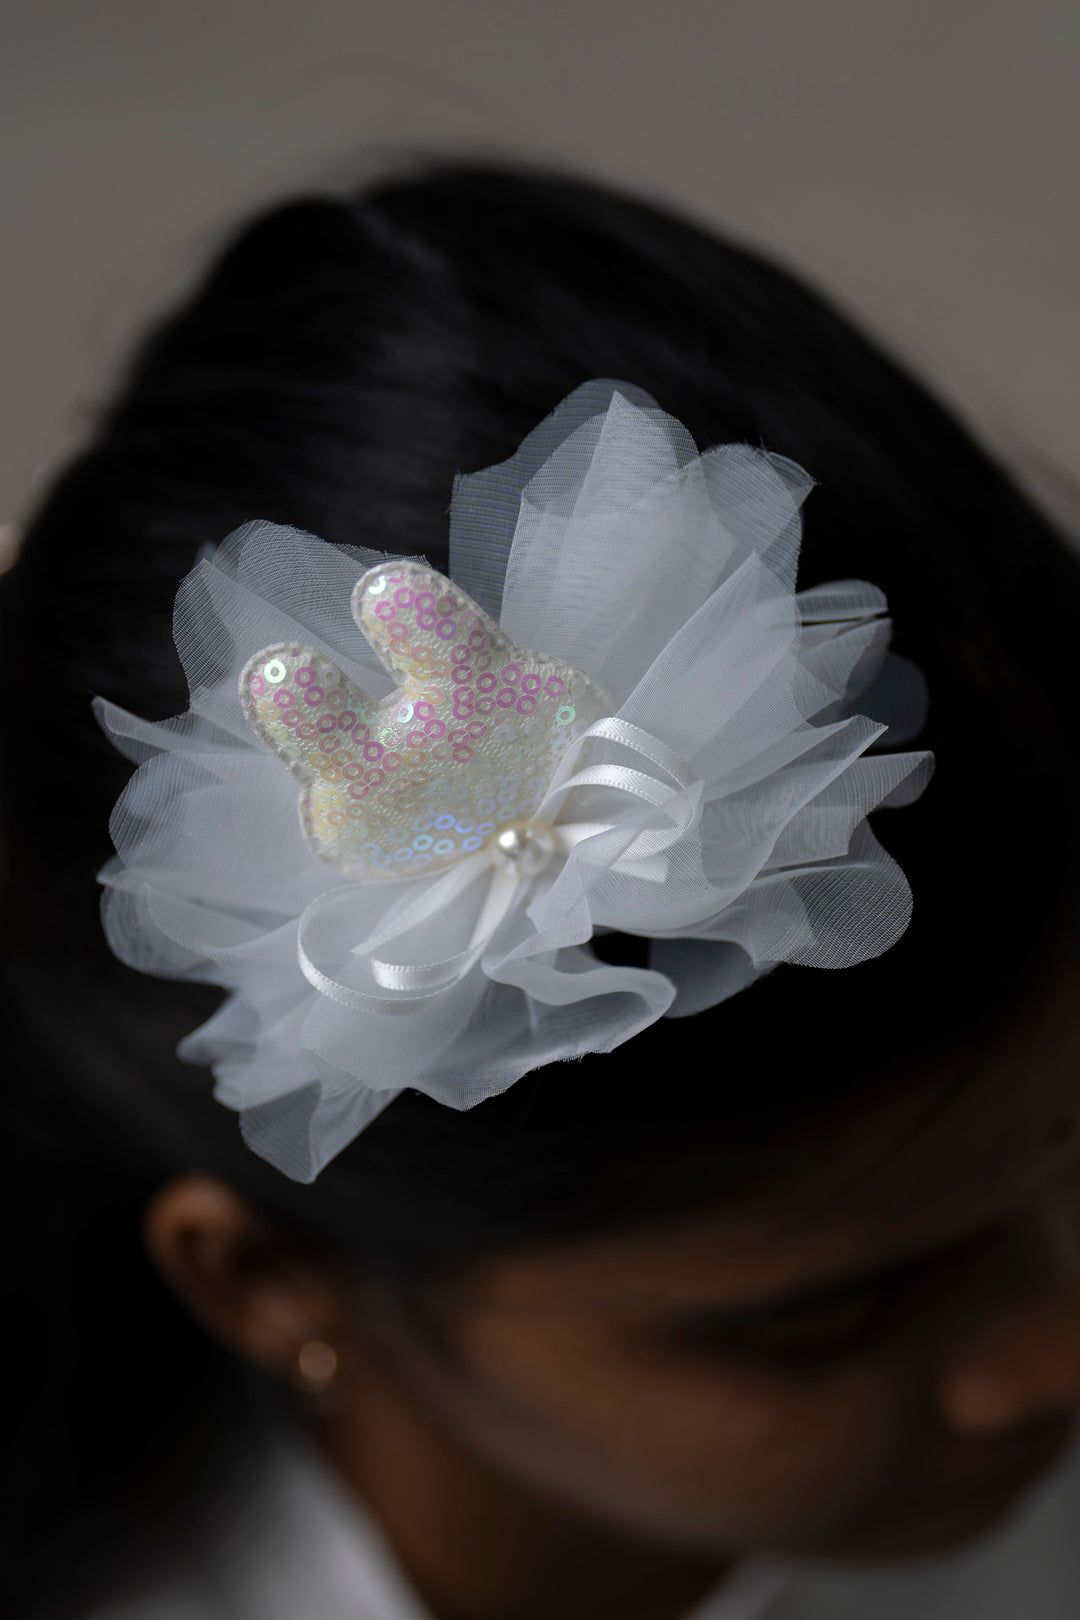 The Nesavu Hair Clip Charming Pastel Pink Sequined Tulle Hair Clip for Girls Nesavu White JHCL65D Pastel Pink Sequined Hair Clip | Adorable Accessory for Stylish Girls | The Nesavu